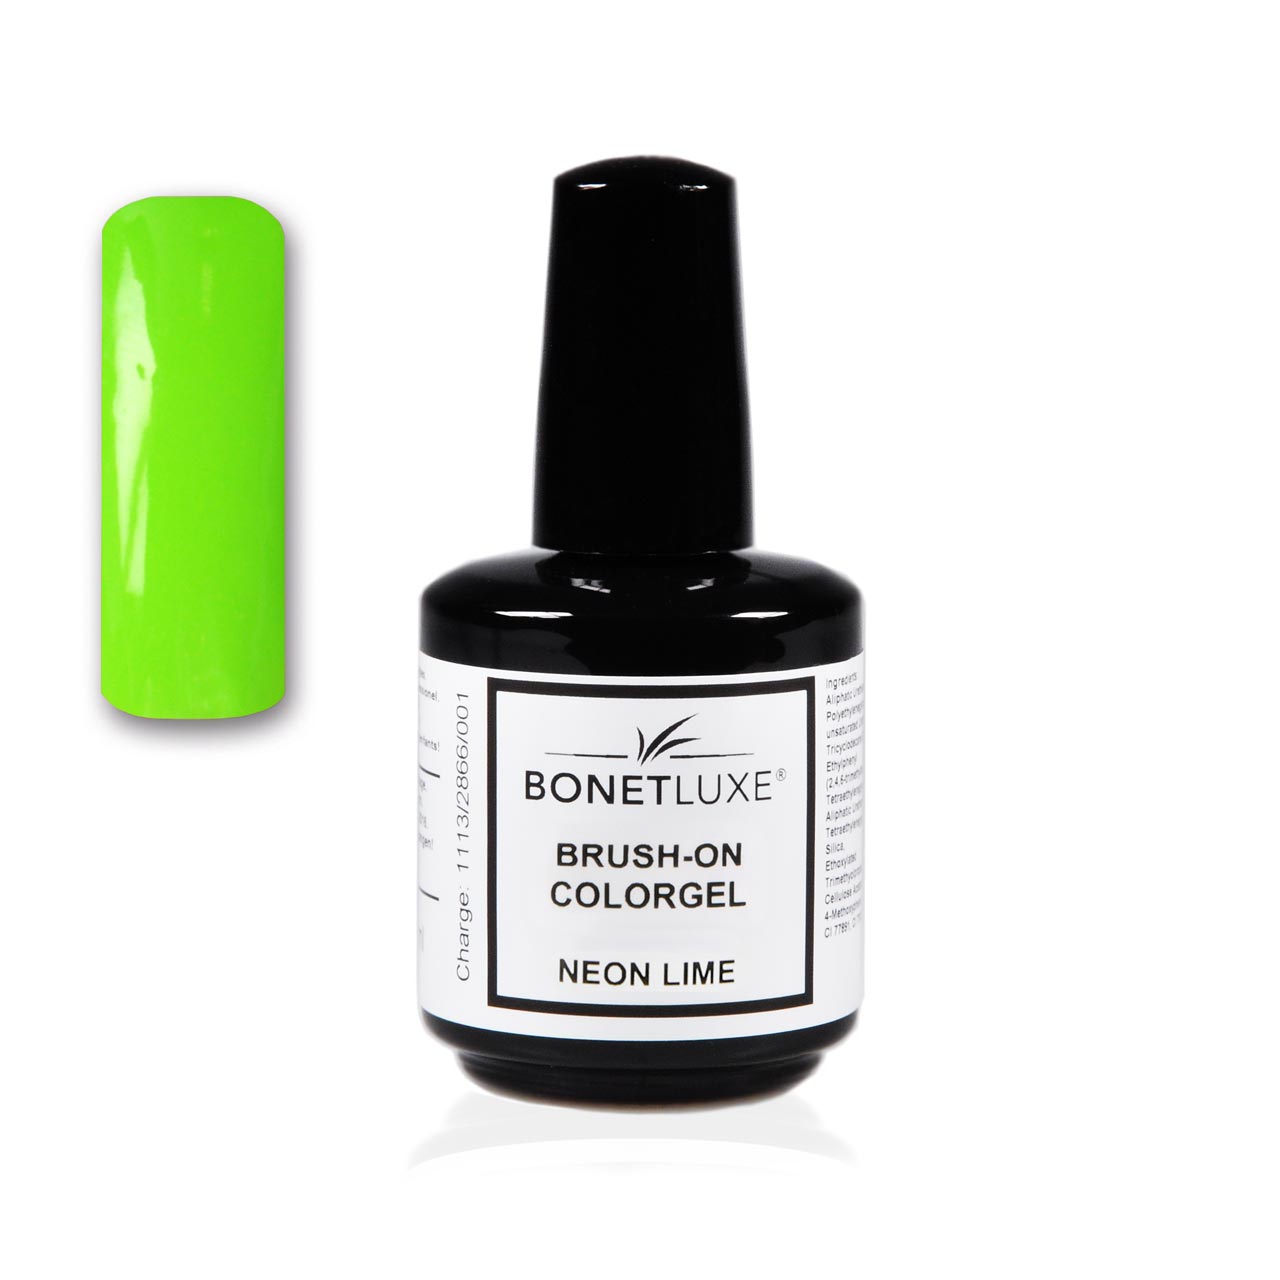 Brush-On Color Gel Neon Lime